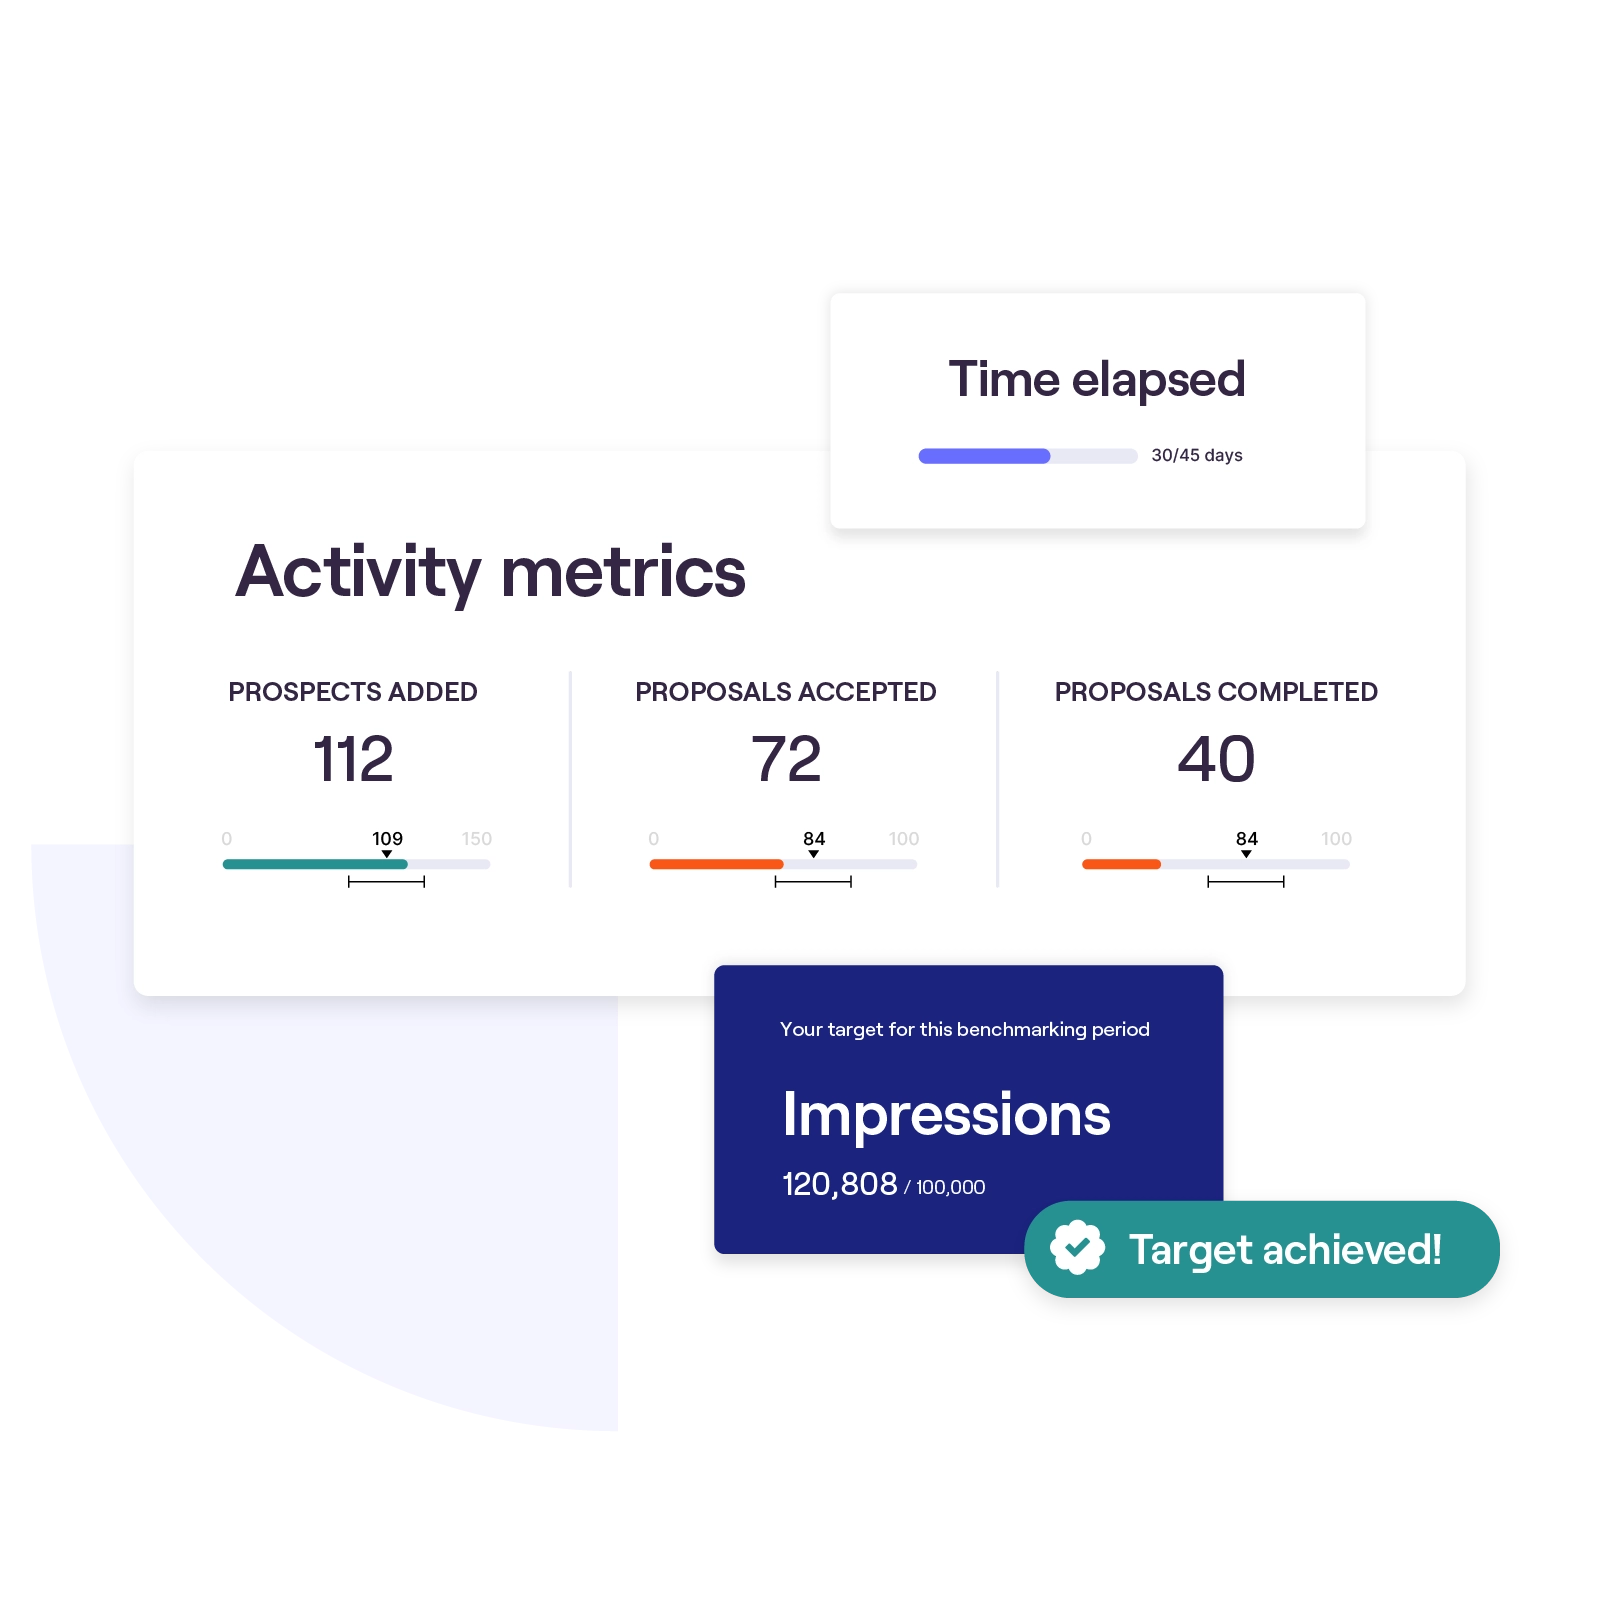 KPIs in our influencer marketing reporting software